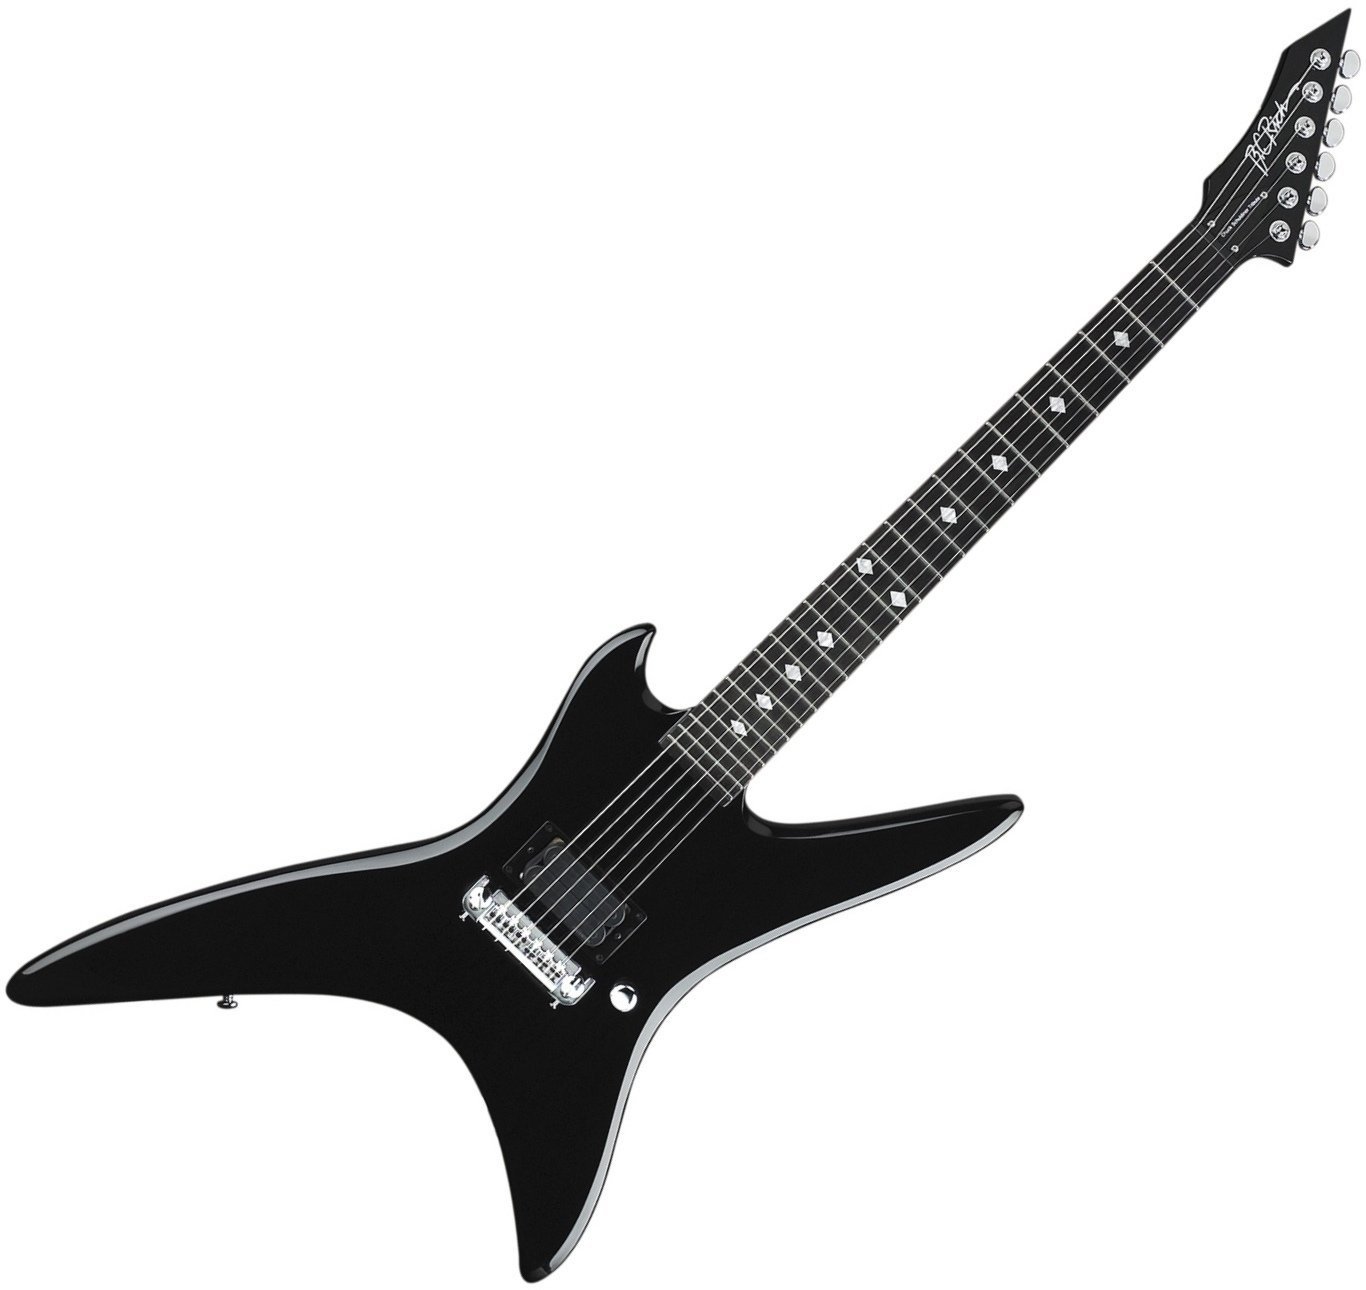 Electric guitar BC RICH CSTSO Stealth Chuck Schuldiner Tribute